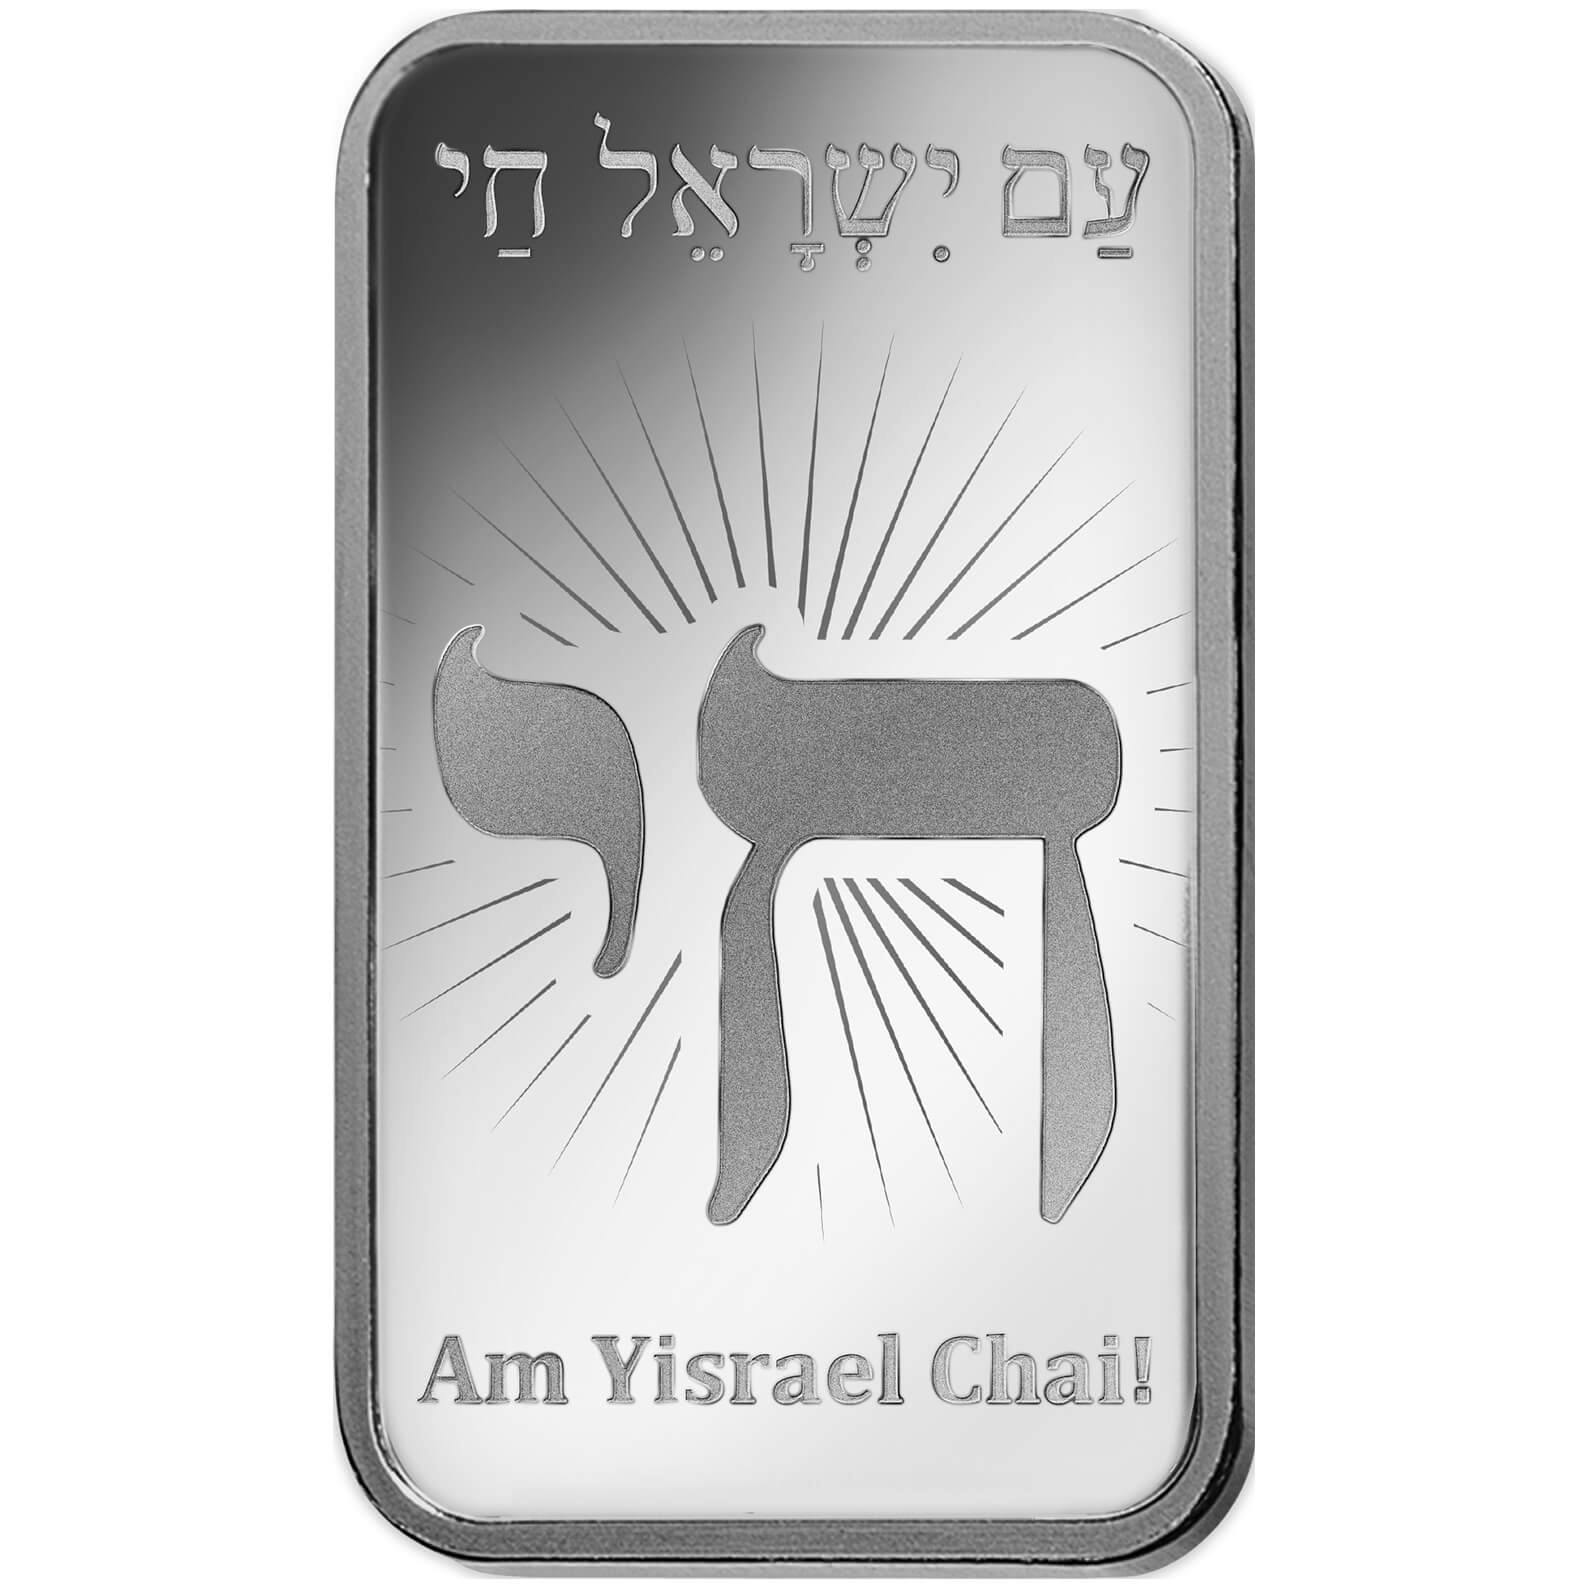 Buy 10 gram Fine Silver Am Yisrael Chai - PAMP Swiss - Front